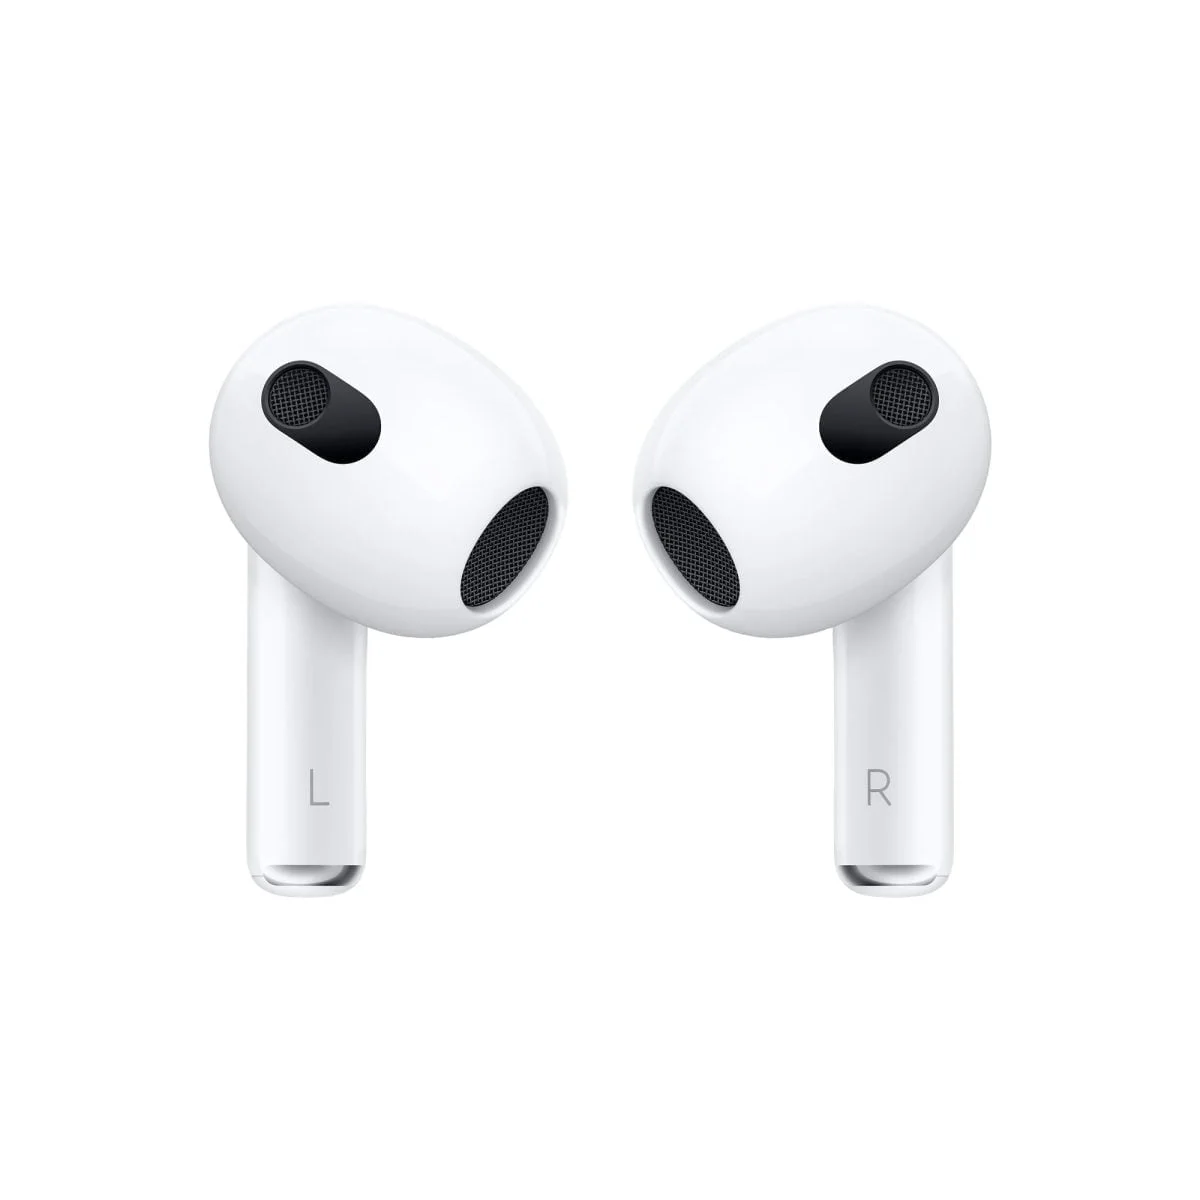 Mme73 Av1 Apple &Lt;H1&Gt;Apple Airpods (3Rd Generation) - White&Lt;/H1&Gt; &Lt;Div Class=&Quot;Rc-Pdsection-Mainpanel Column Large-9 Small-12&Quot;&Gt; &Lt;H2 Class=&Quot;H4-Para-Title&Quot;&Gt;All-New Design&Lt;/H2&Gt; &Lt;Div Class=&Quot;Para-List As-Pdp-Lastparalist&Quot;&Gt; Airpods Are Lightweight And Offer A Contoured Design. They Sit At Just The Right Angle For Comfort And To Better Direct Audio To Your Ear. The Stem Is 33 Percent Shorter Than Airpods (2Nd Generation) And Includes A Force Sensor To Easily Control Music And Calls. &Lt;/Div&Gt; &Lt;/Div&Gt; Apple Airpods Apple Airpods (3Rd Generation) - White (Mme73)